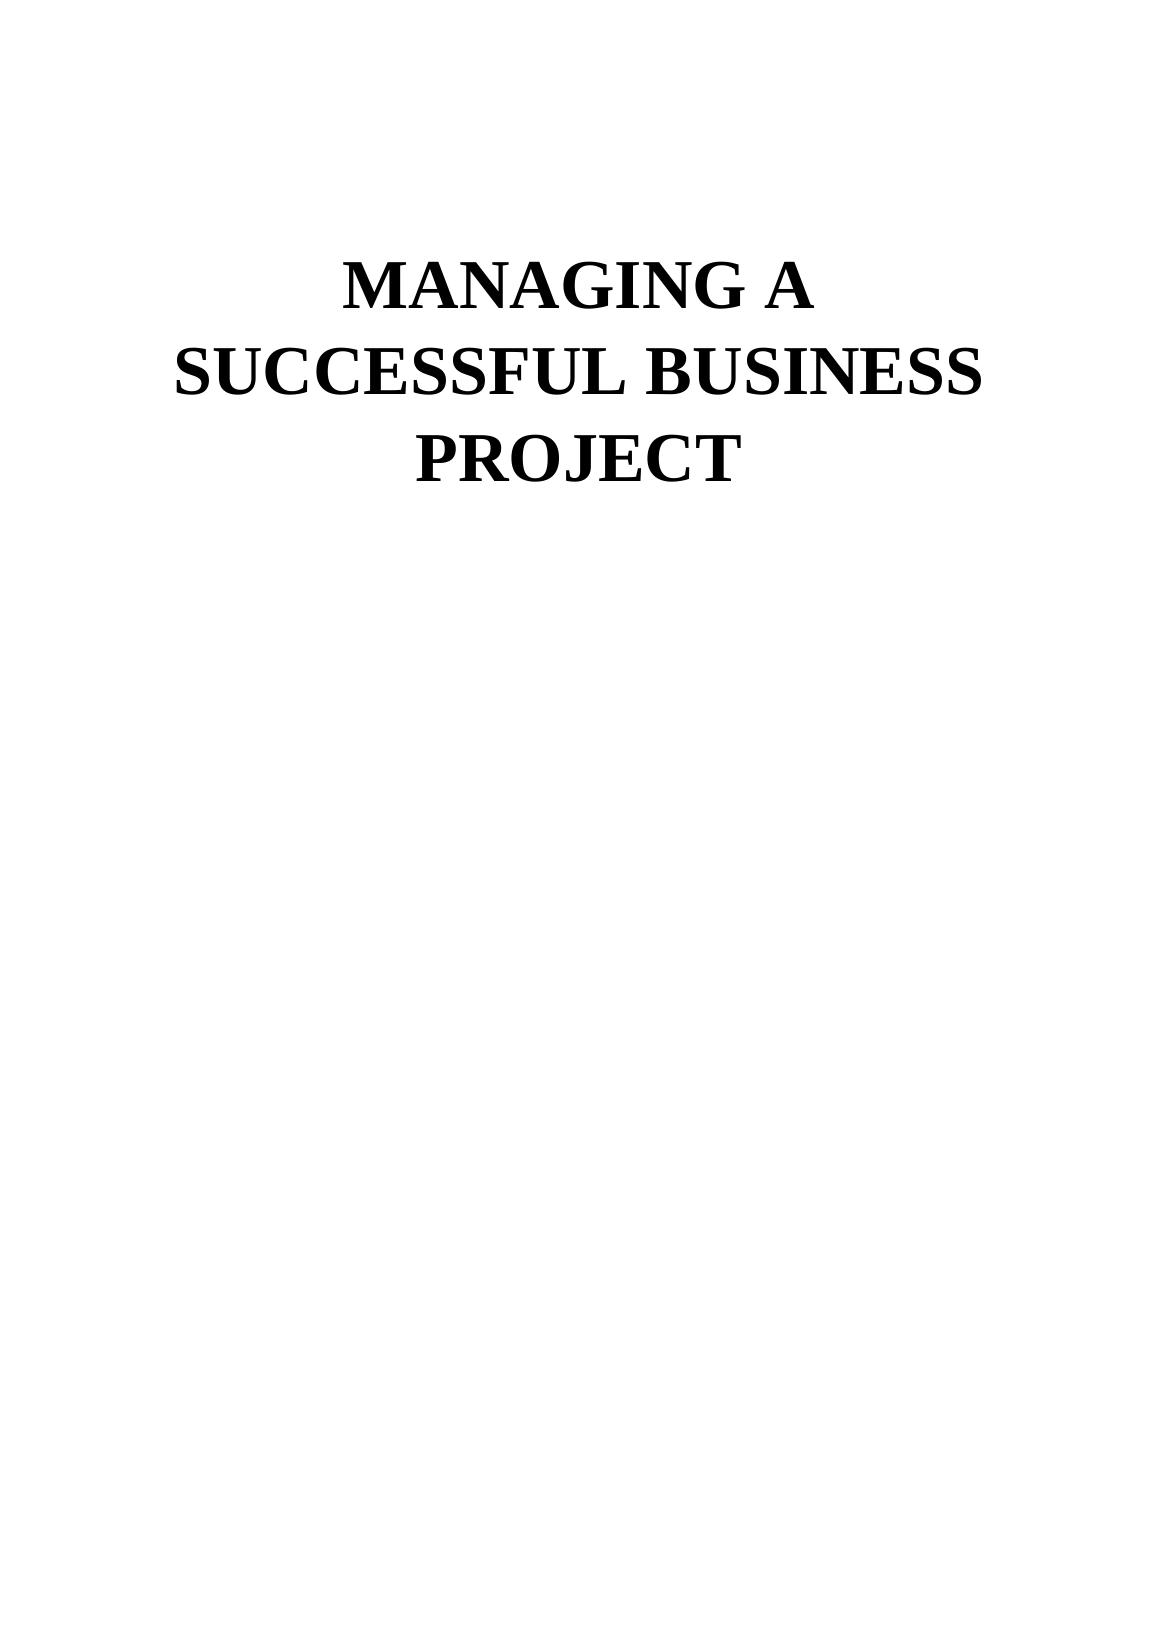 Managing a Successful Business Project - Continental Consulting Limited_1